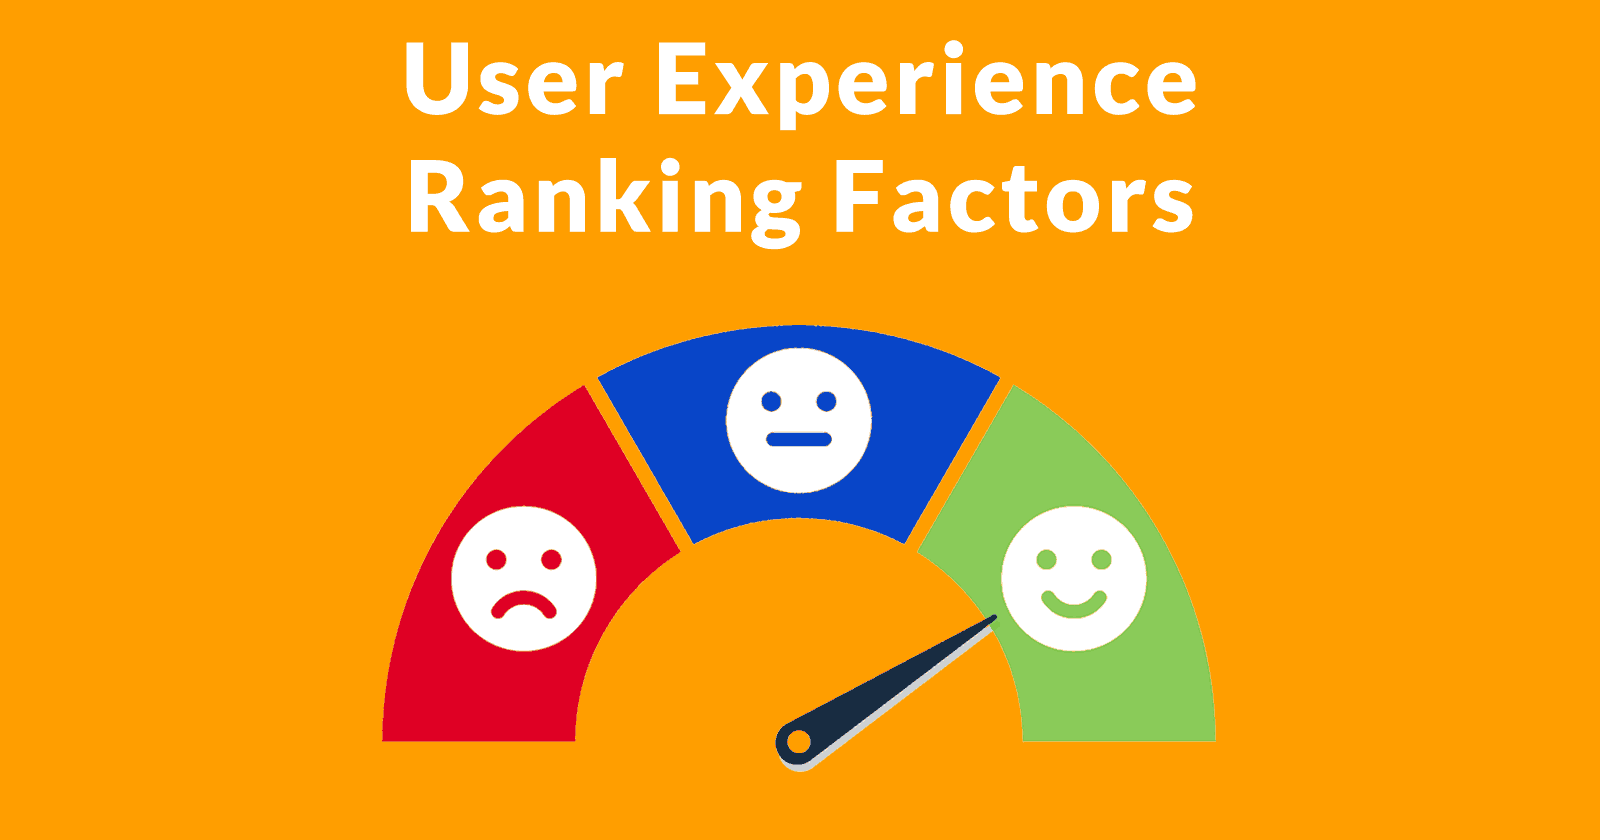 Image of a meter that rates satisfaction and the words "User Experience Ranking Factors" written above it.